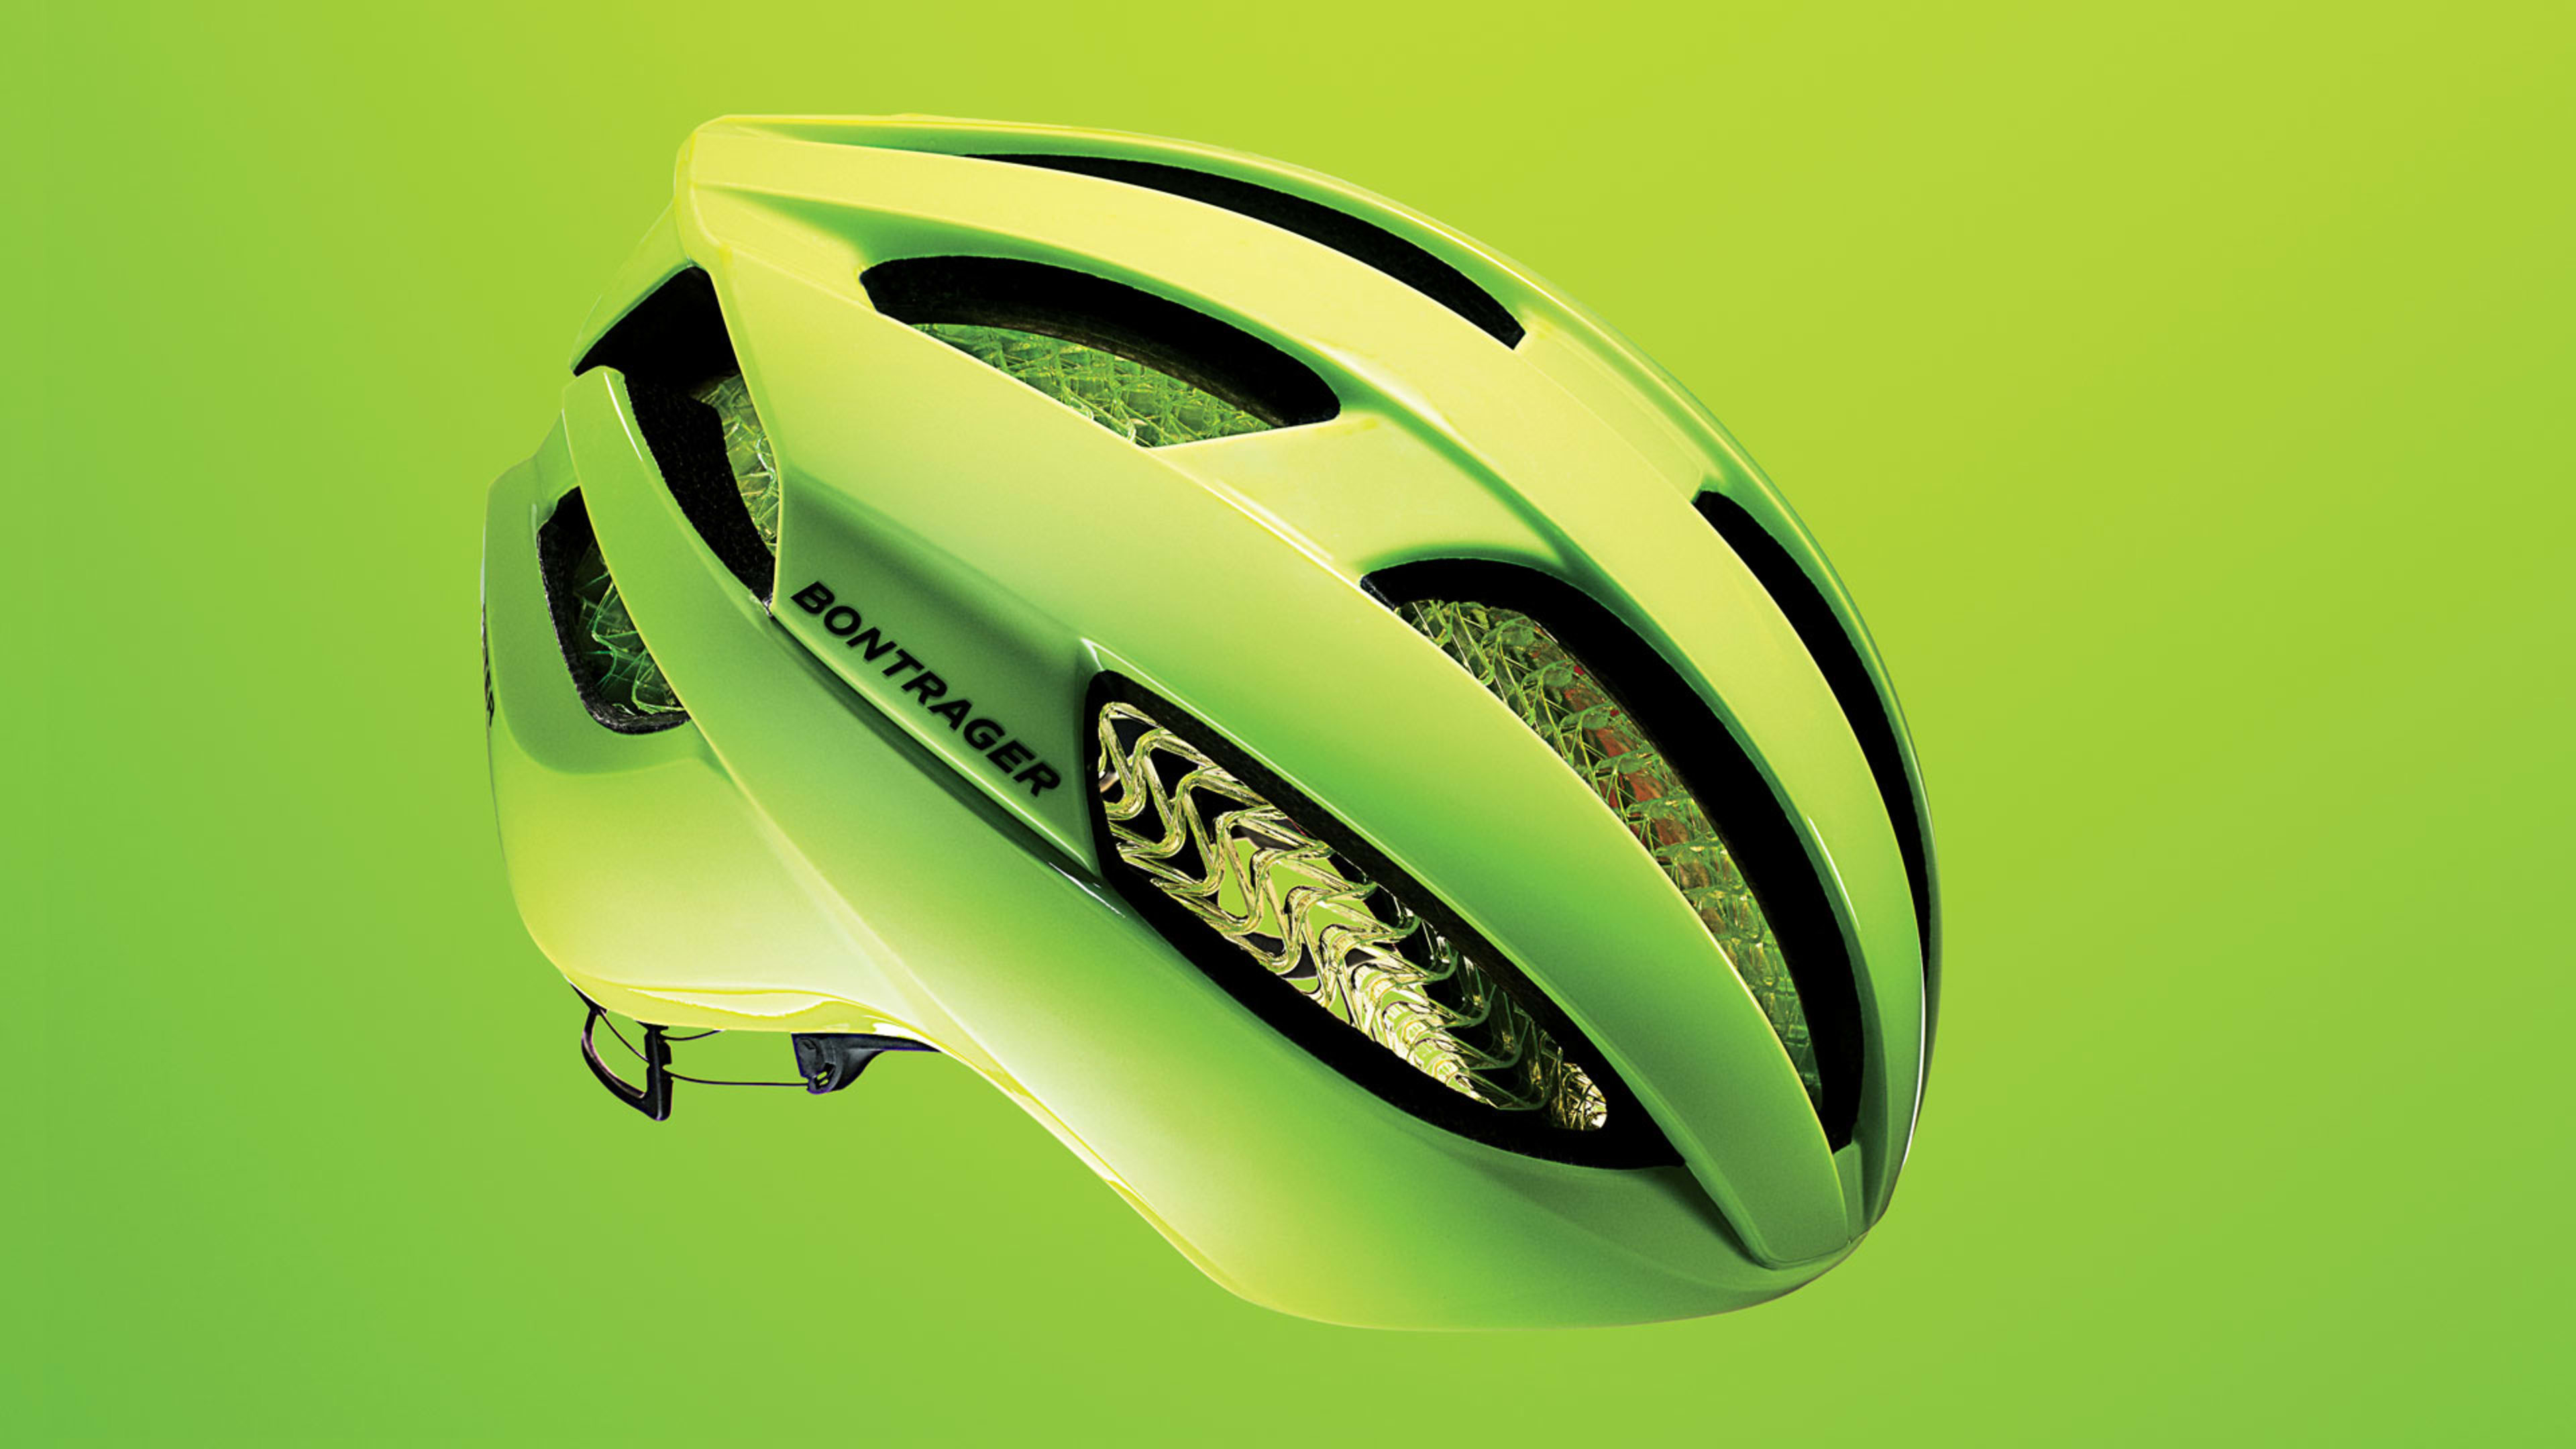 A new bike helmet offers a novel way to stop concussions